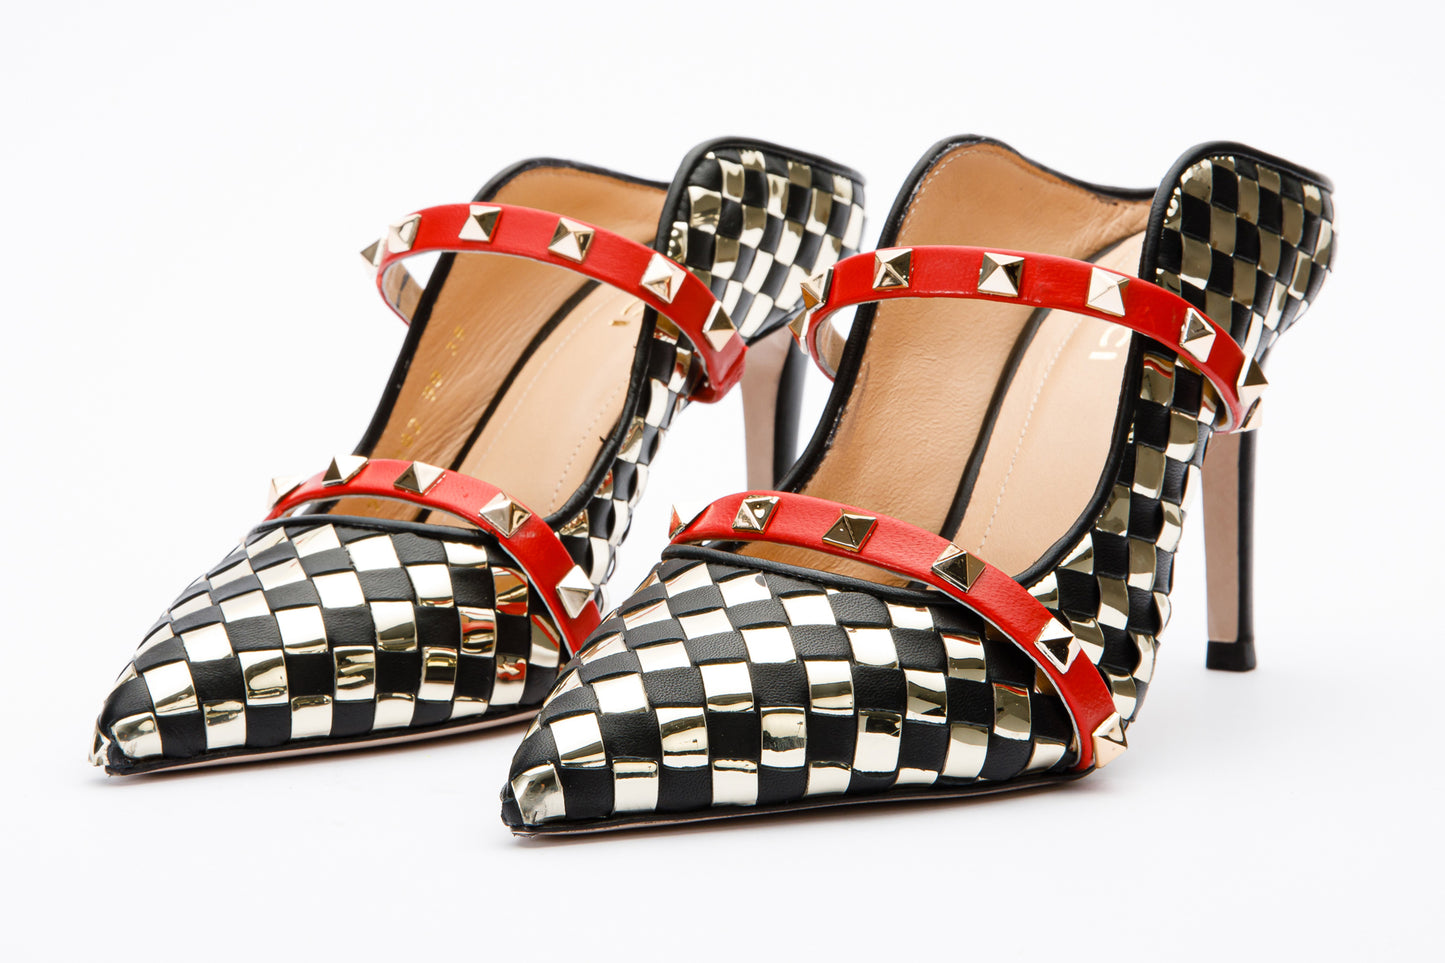 The Dosso Black Handwoven Leather Pointy Toe Women Sandal